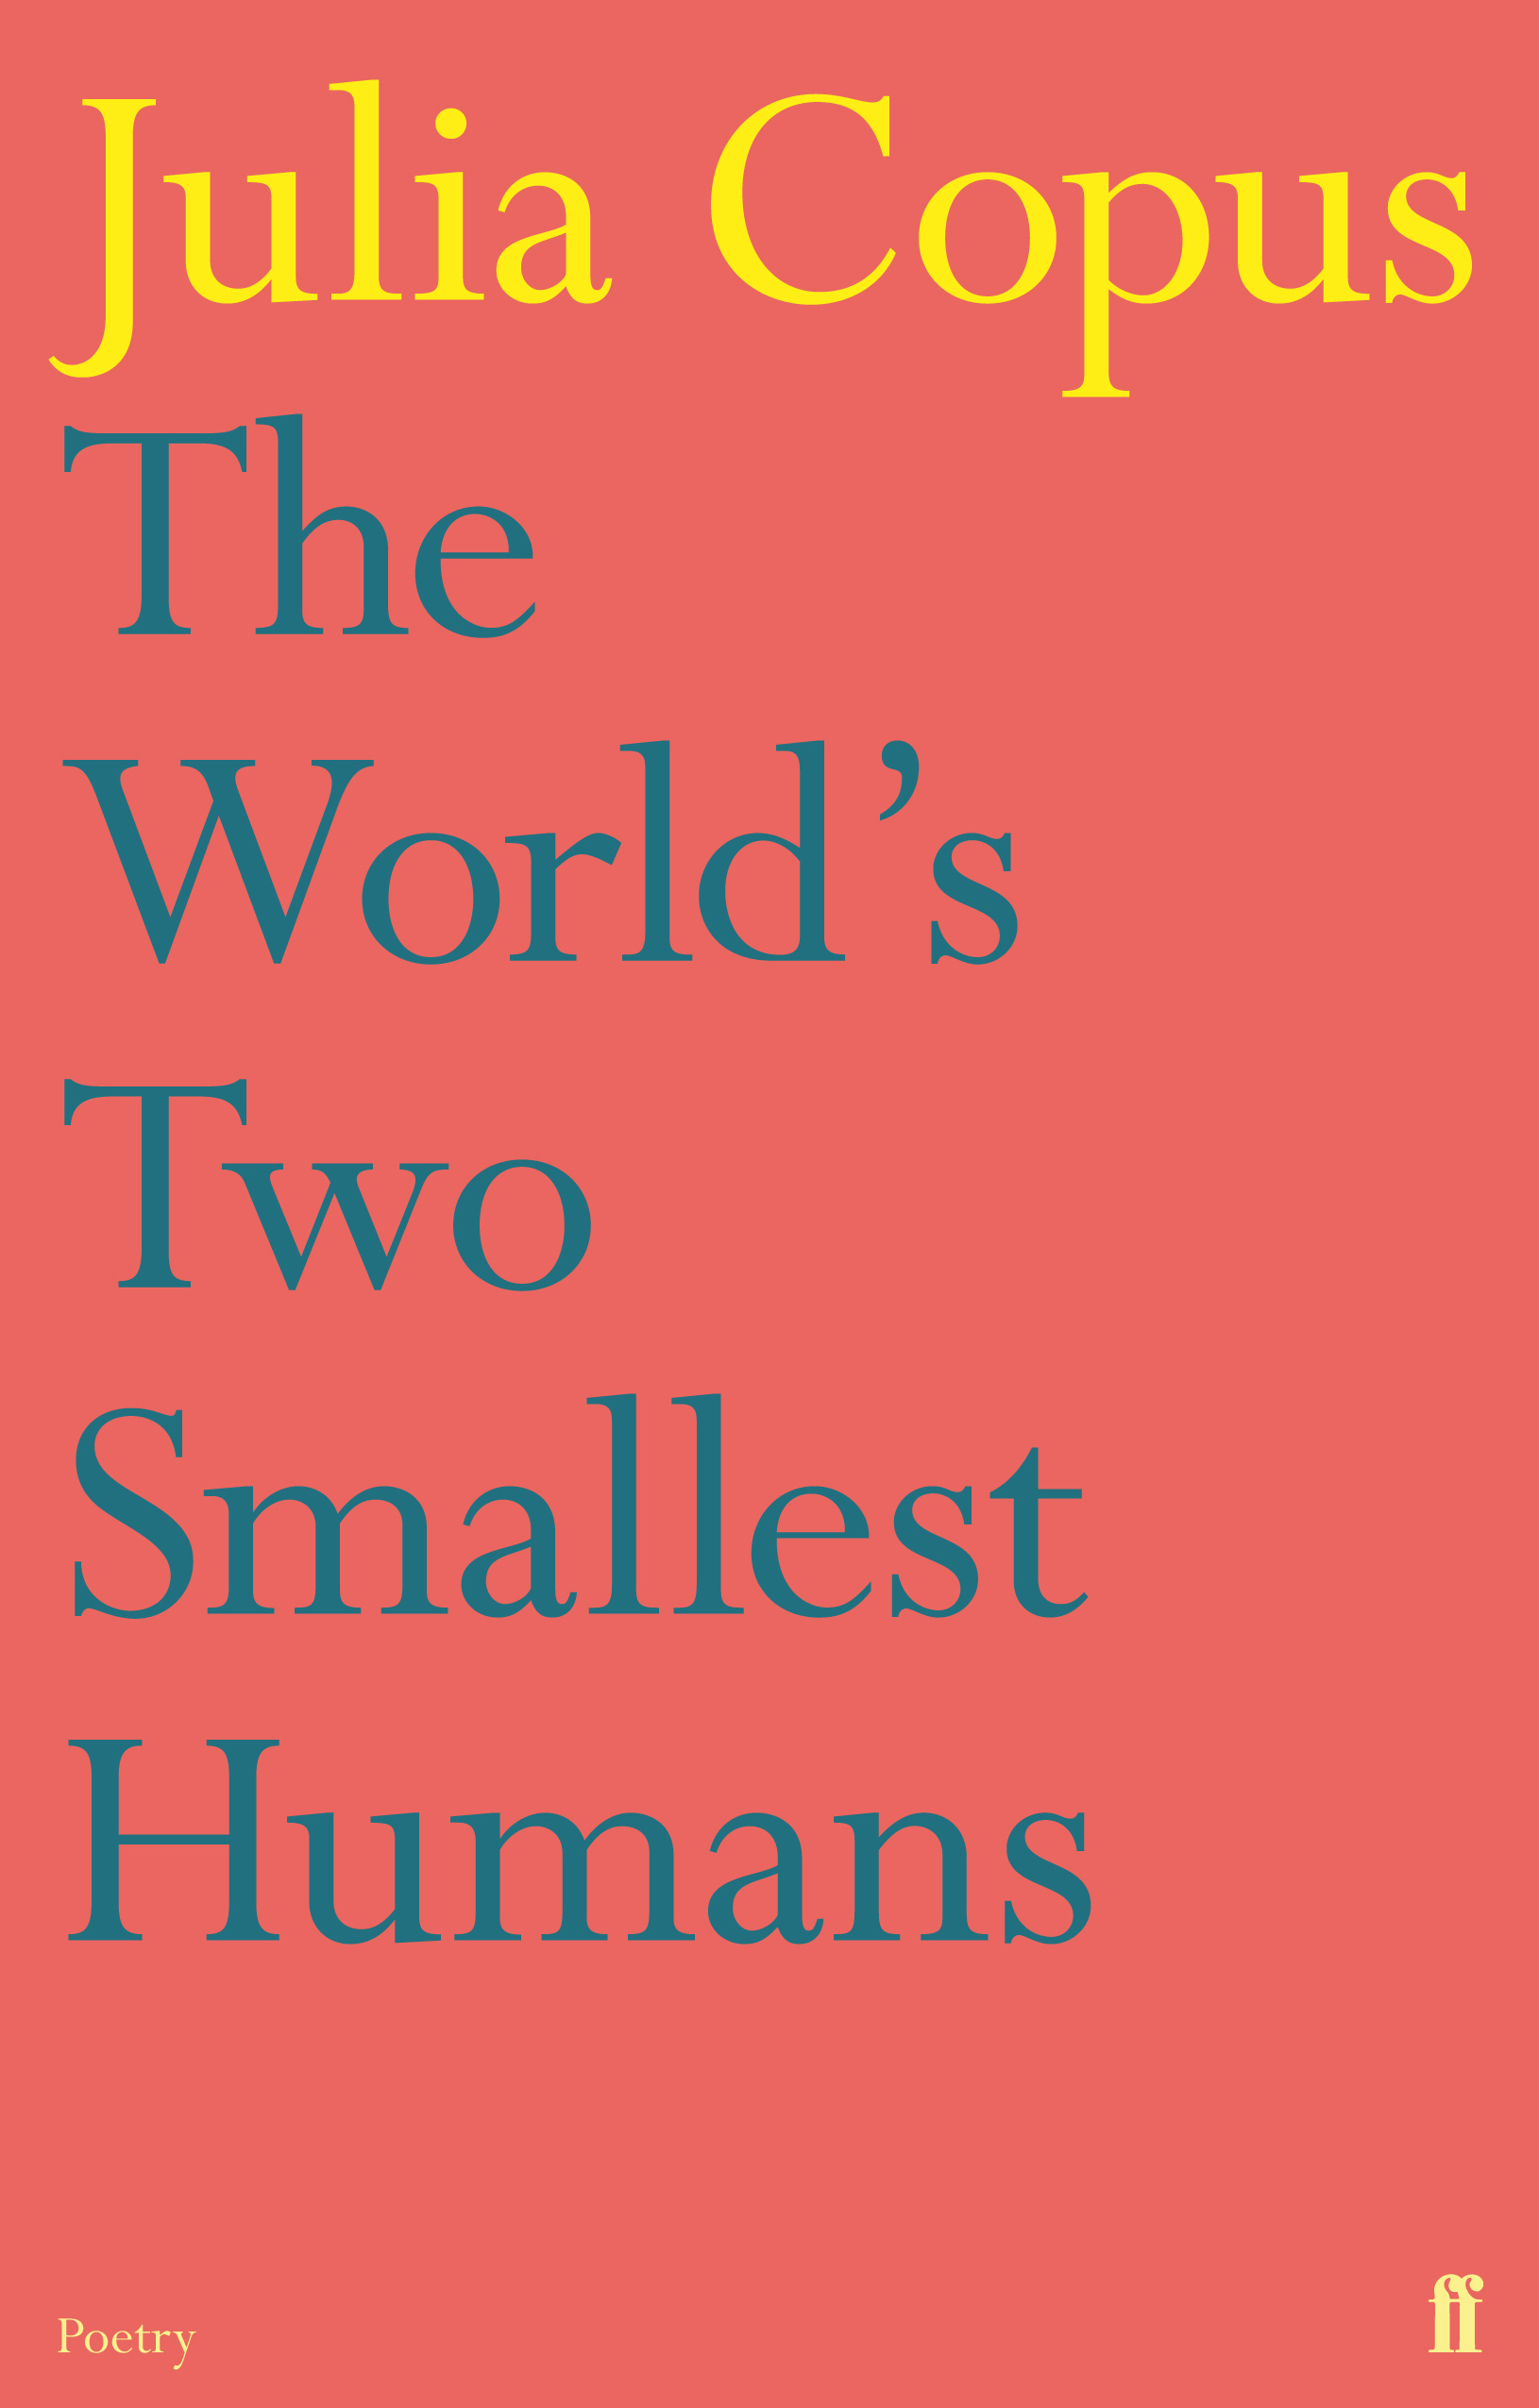 The World's Two Smallest Humans by Julia Copus